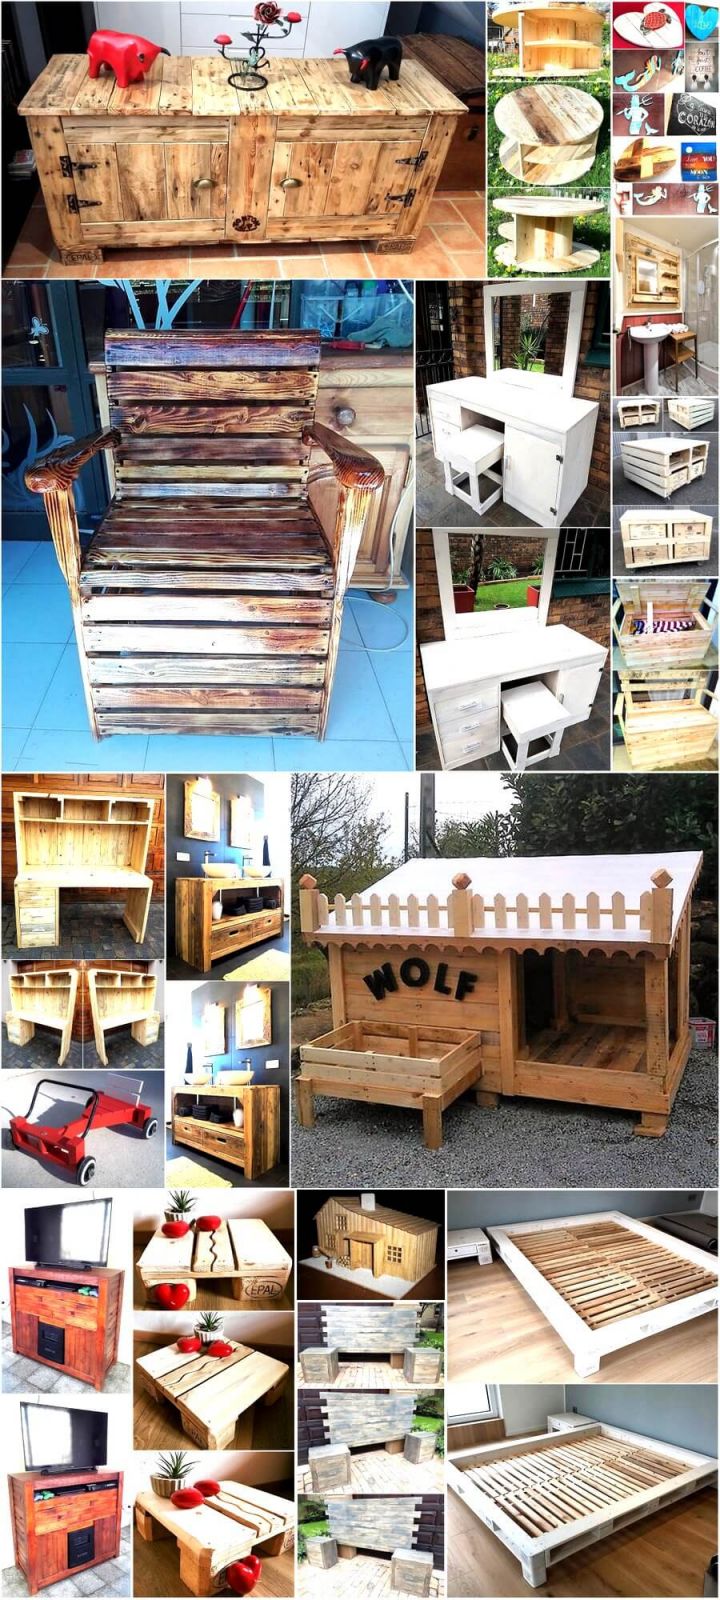  Best creative ideas with wooden pallets 